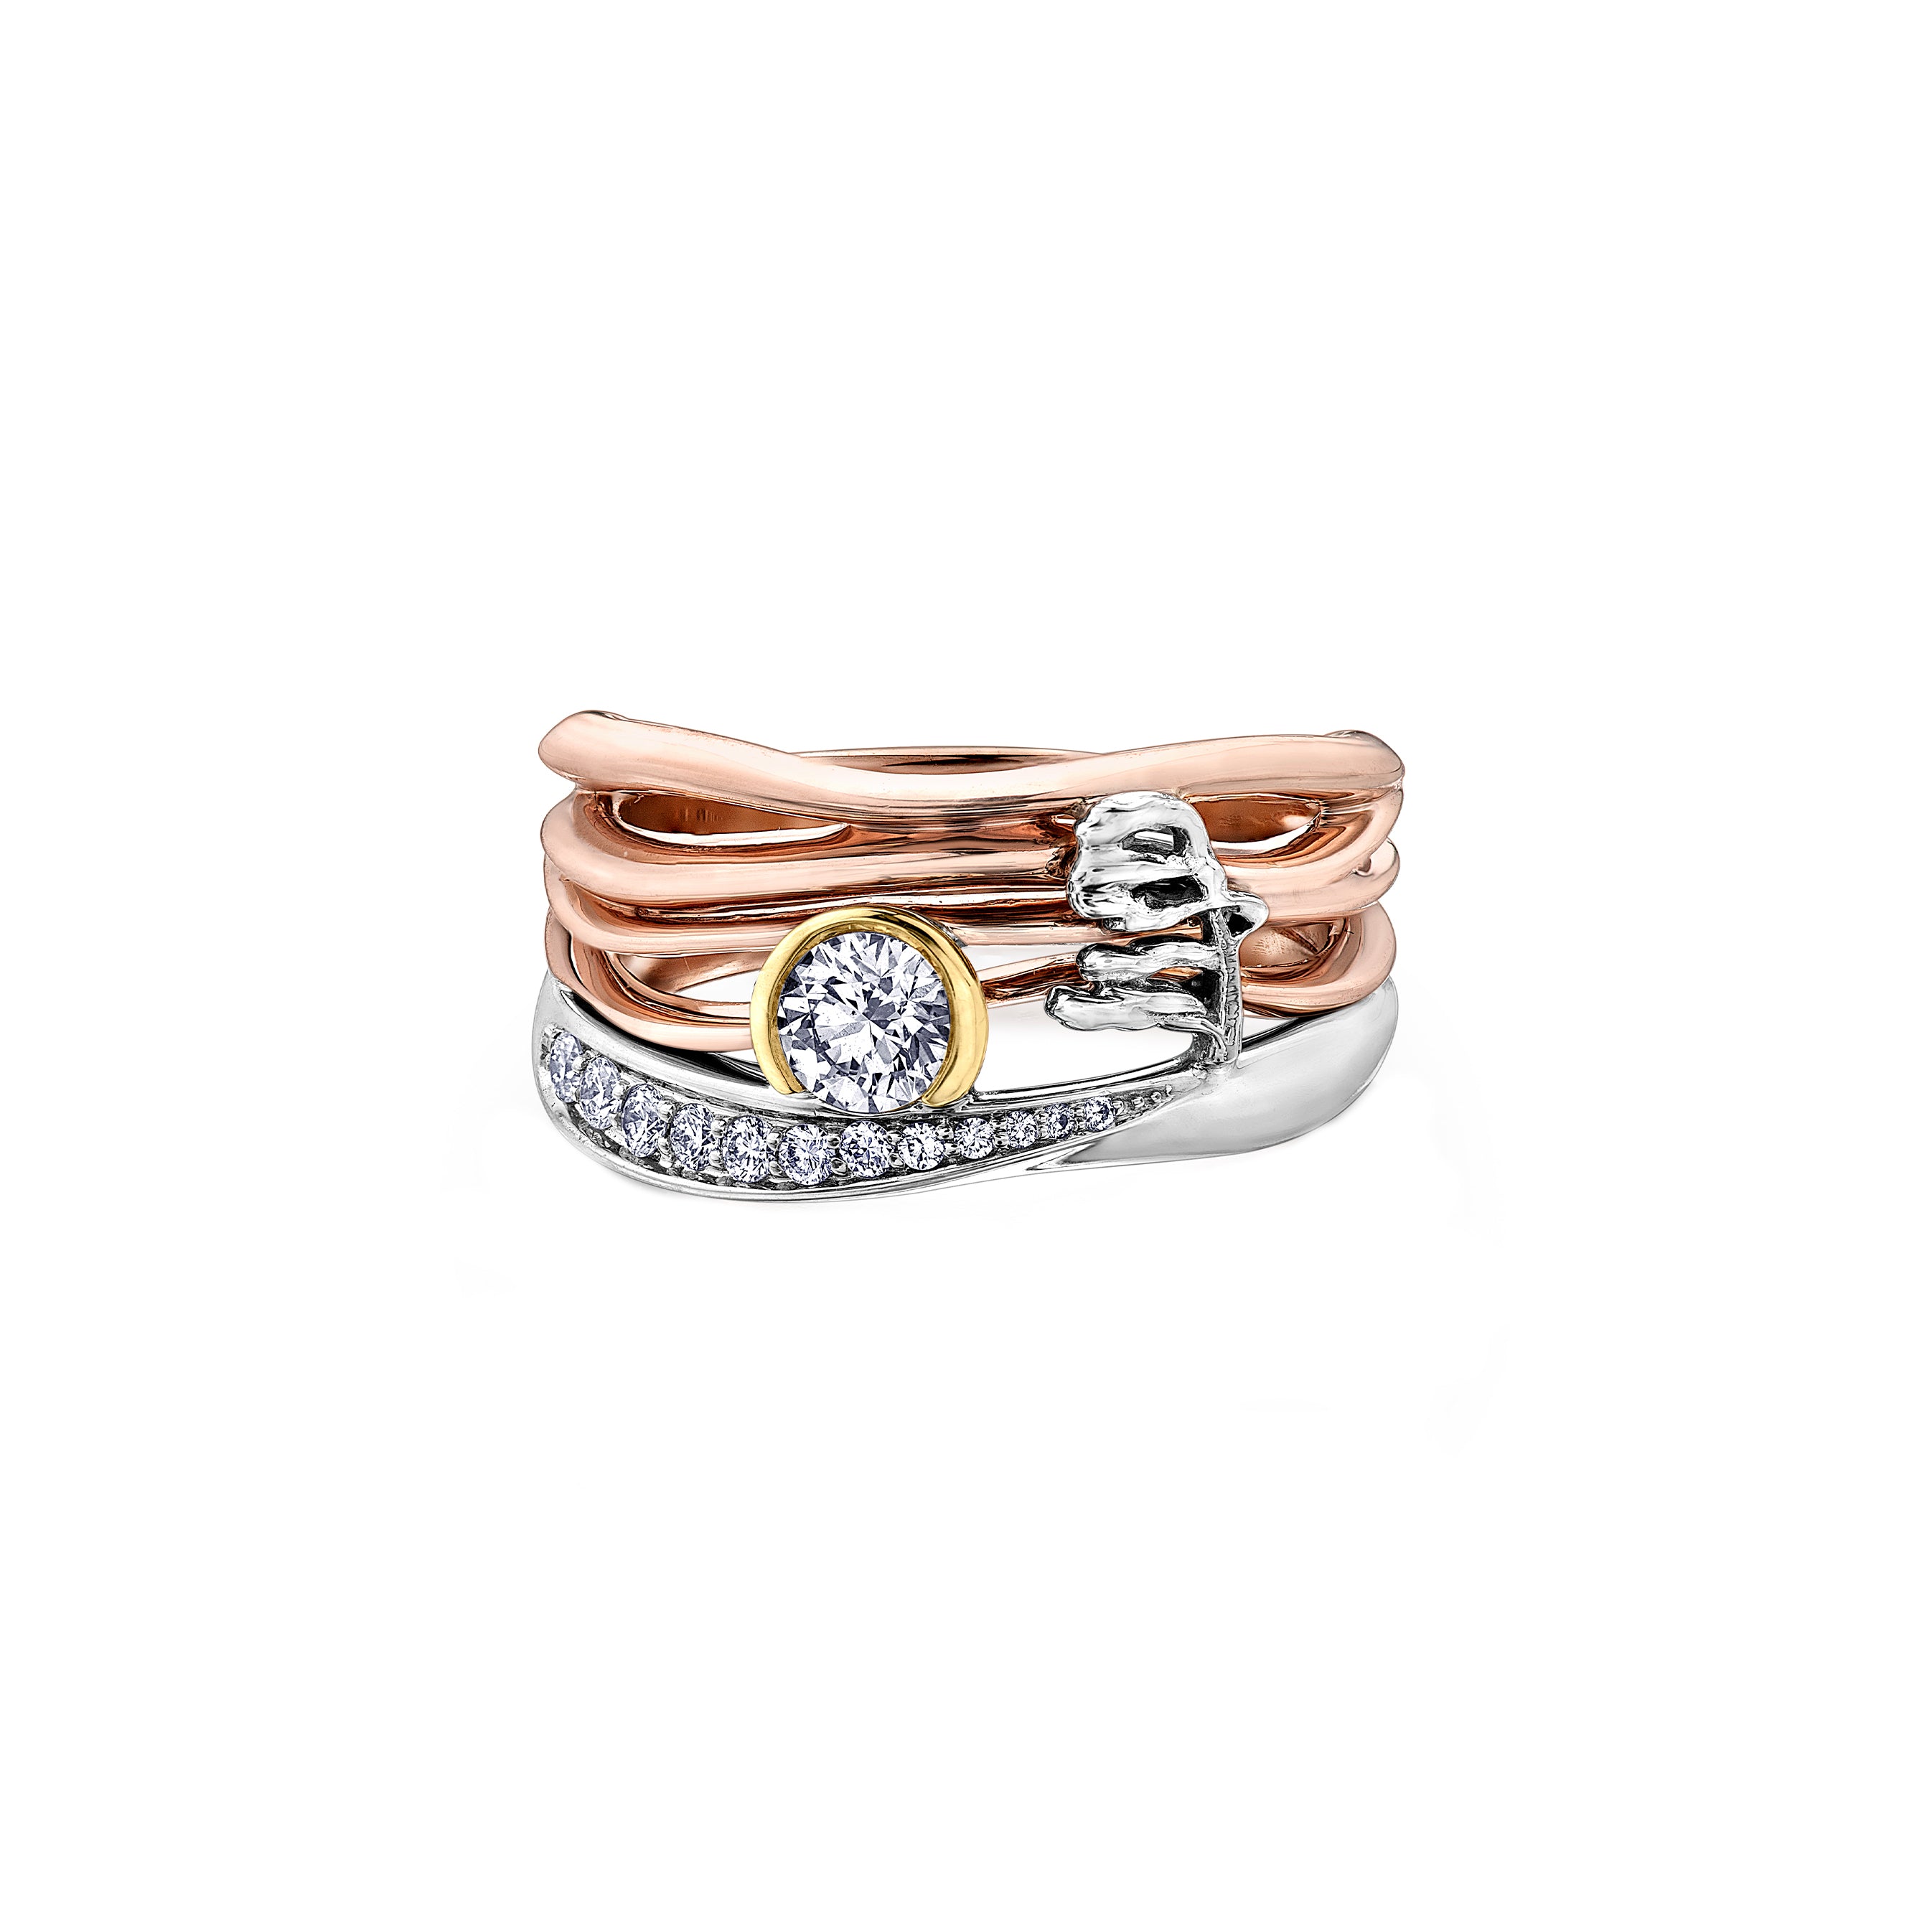 Crafted in 14KT rose, white, and yellow Certified Canadian Gold, this ring features a sunset scene with a round brilliant-cut Canadian diamond sun, diamond set lake, and Group of Seven inspired tree. 